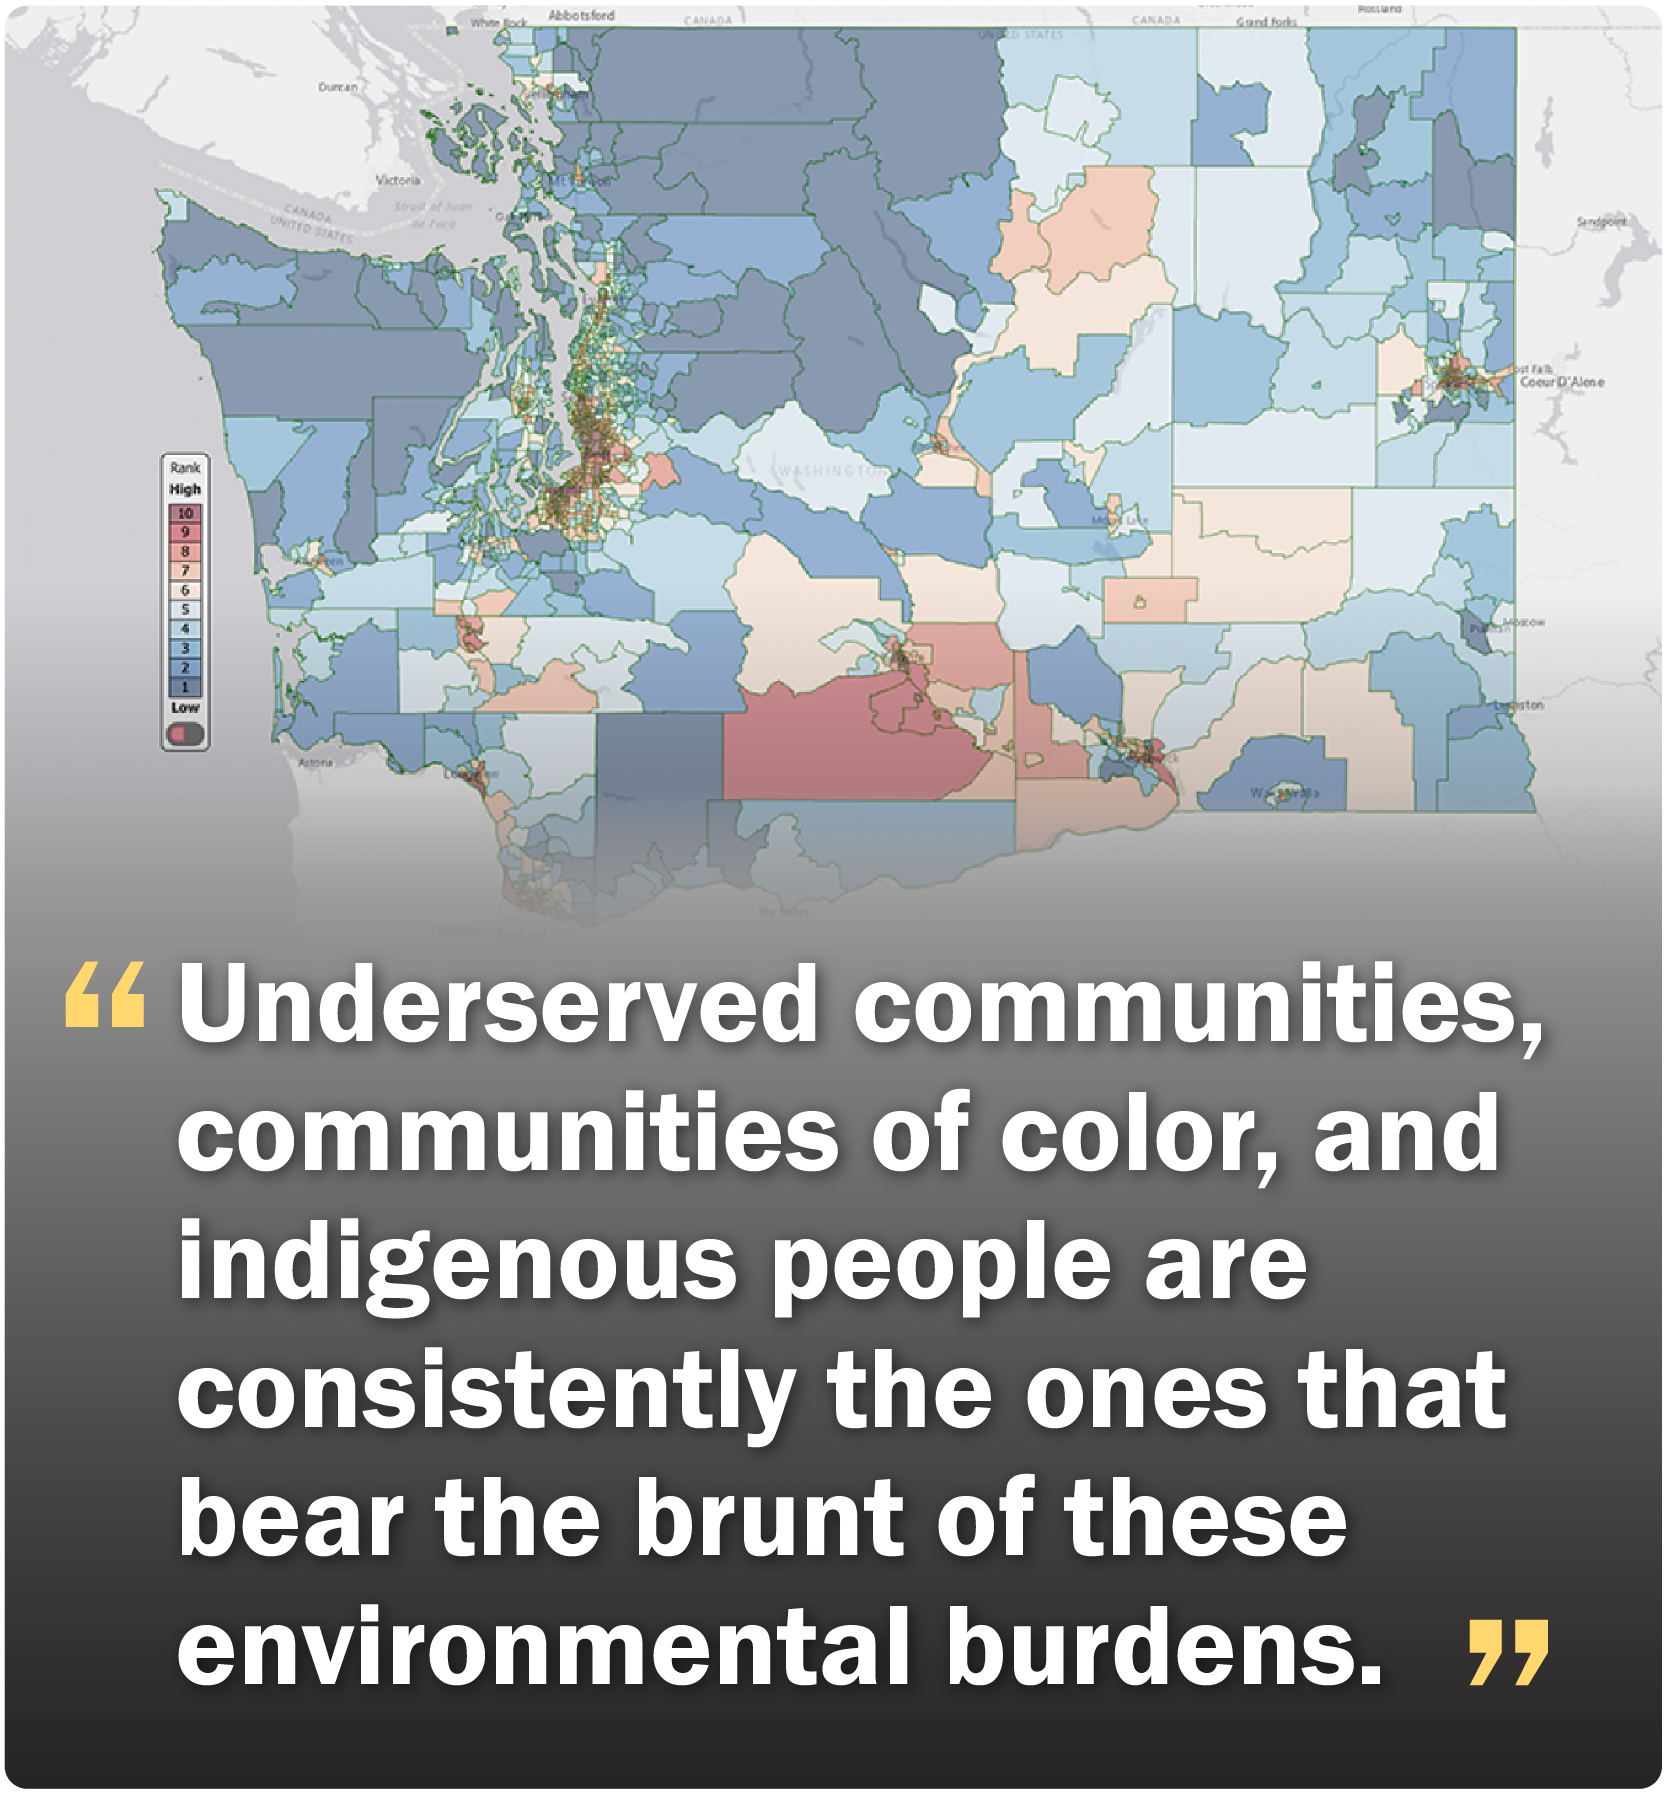 Map showing overburdened areas of Washington with a quote overlay about marginalized groups bearing the burnt of environmental burdens